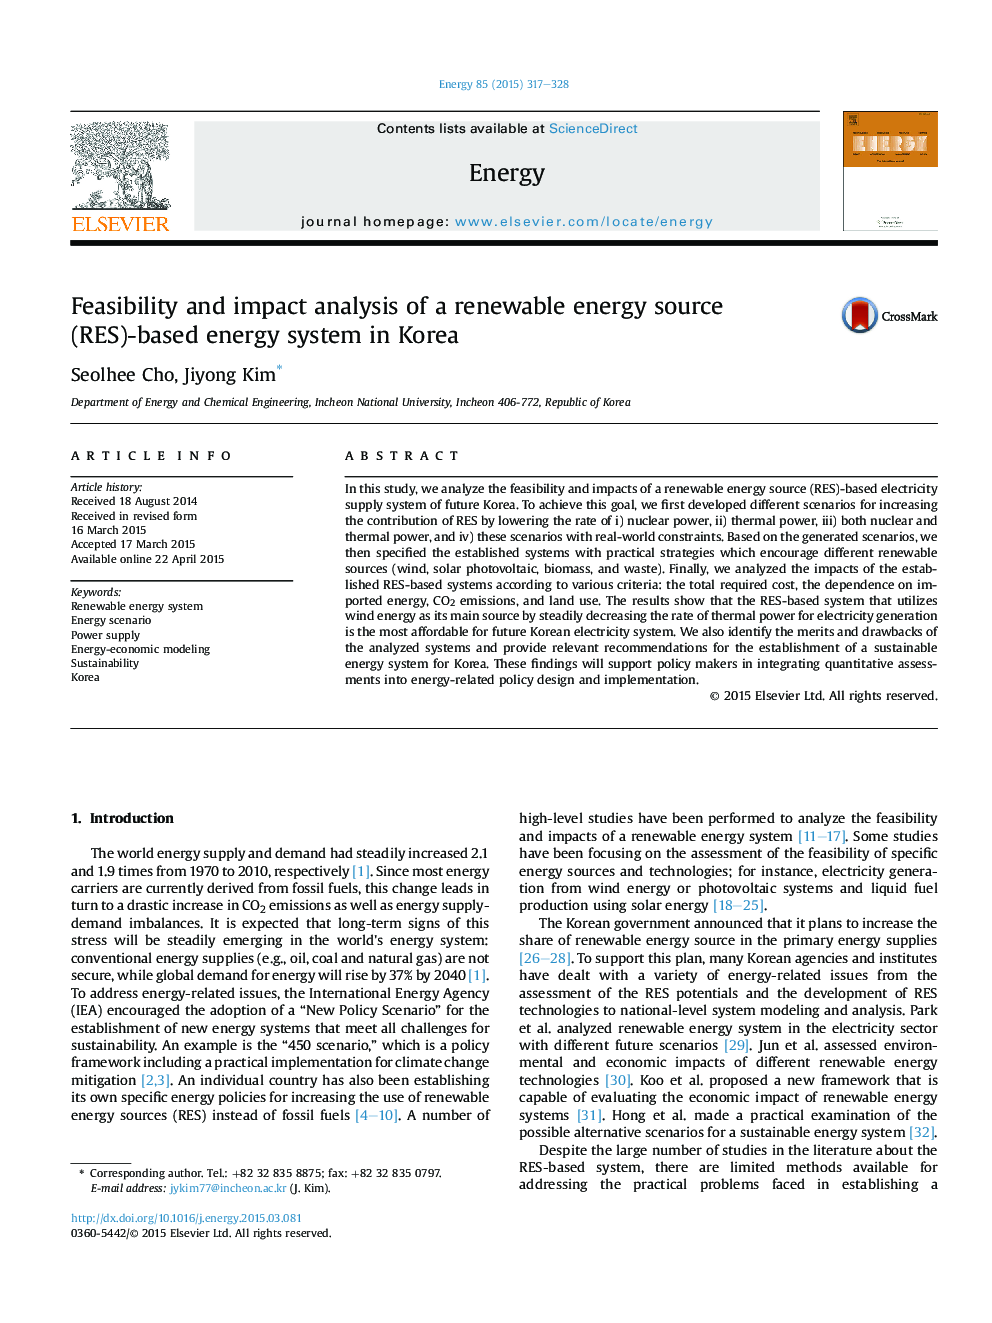 Feasibility and impact analysis of a renewable energy source (RES)-based energy system in Korea